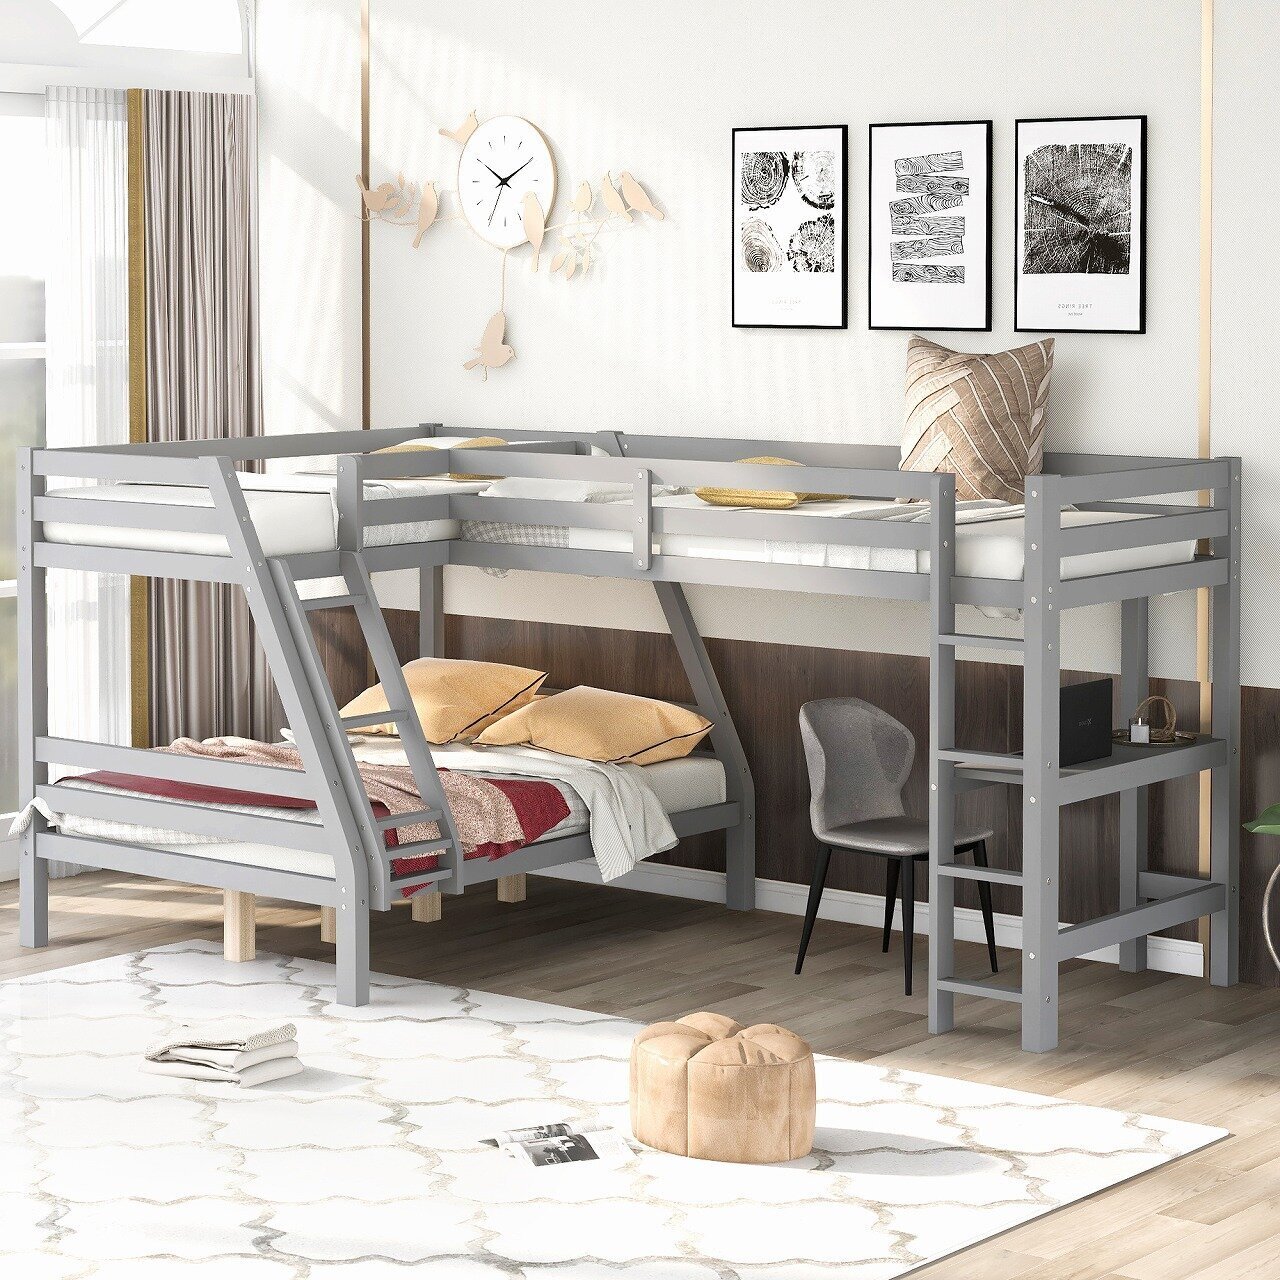 3 Bed L Shaped Bunk Beds with Desk Underneath 